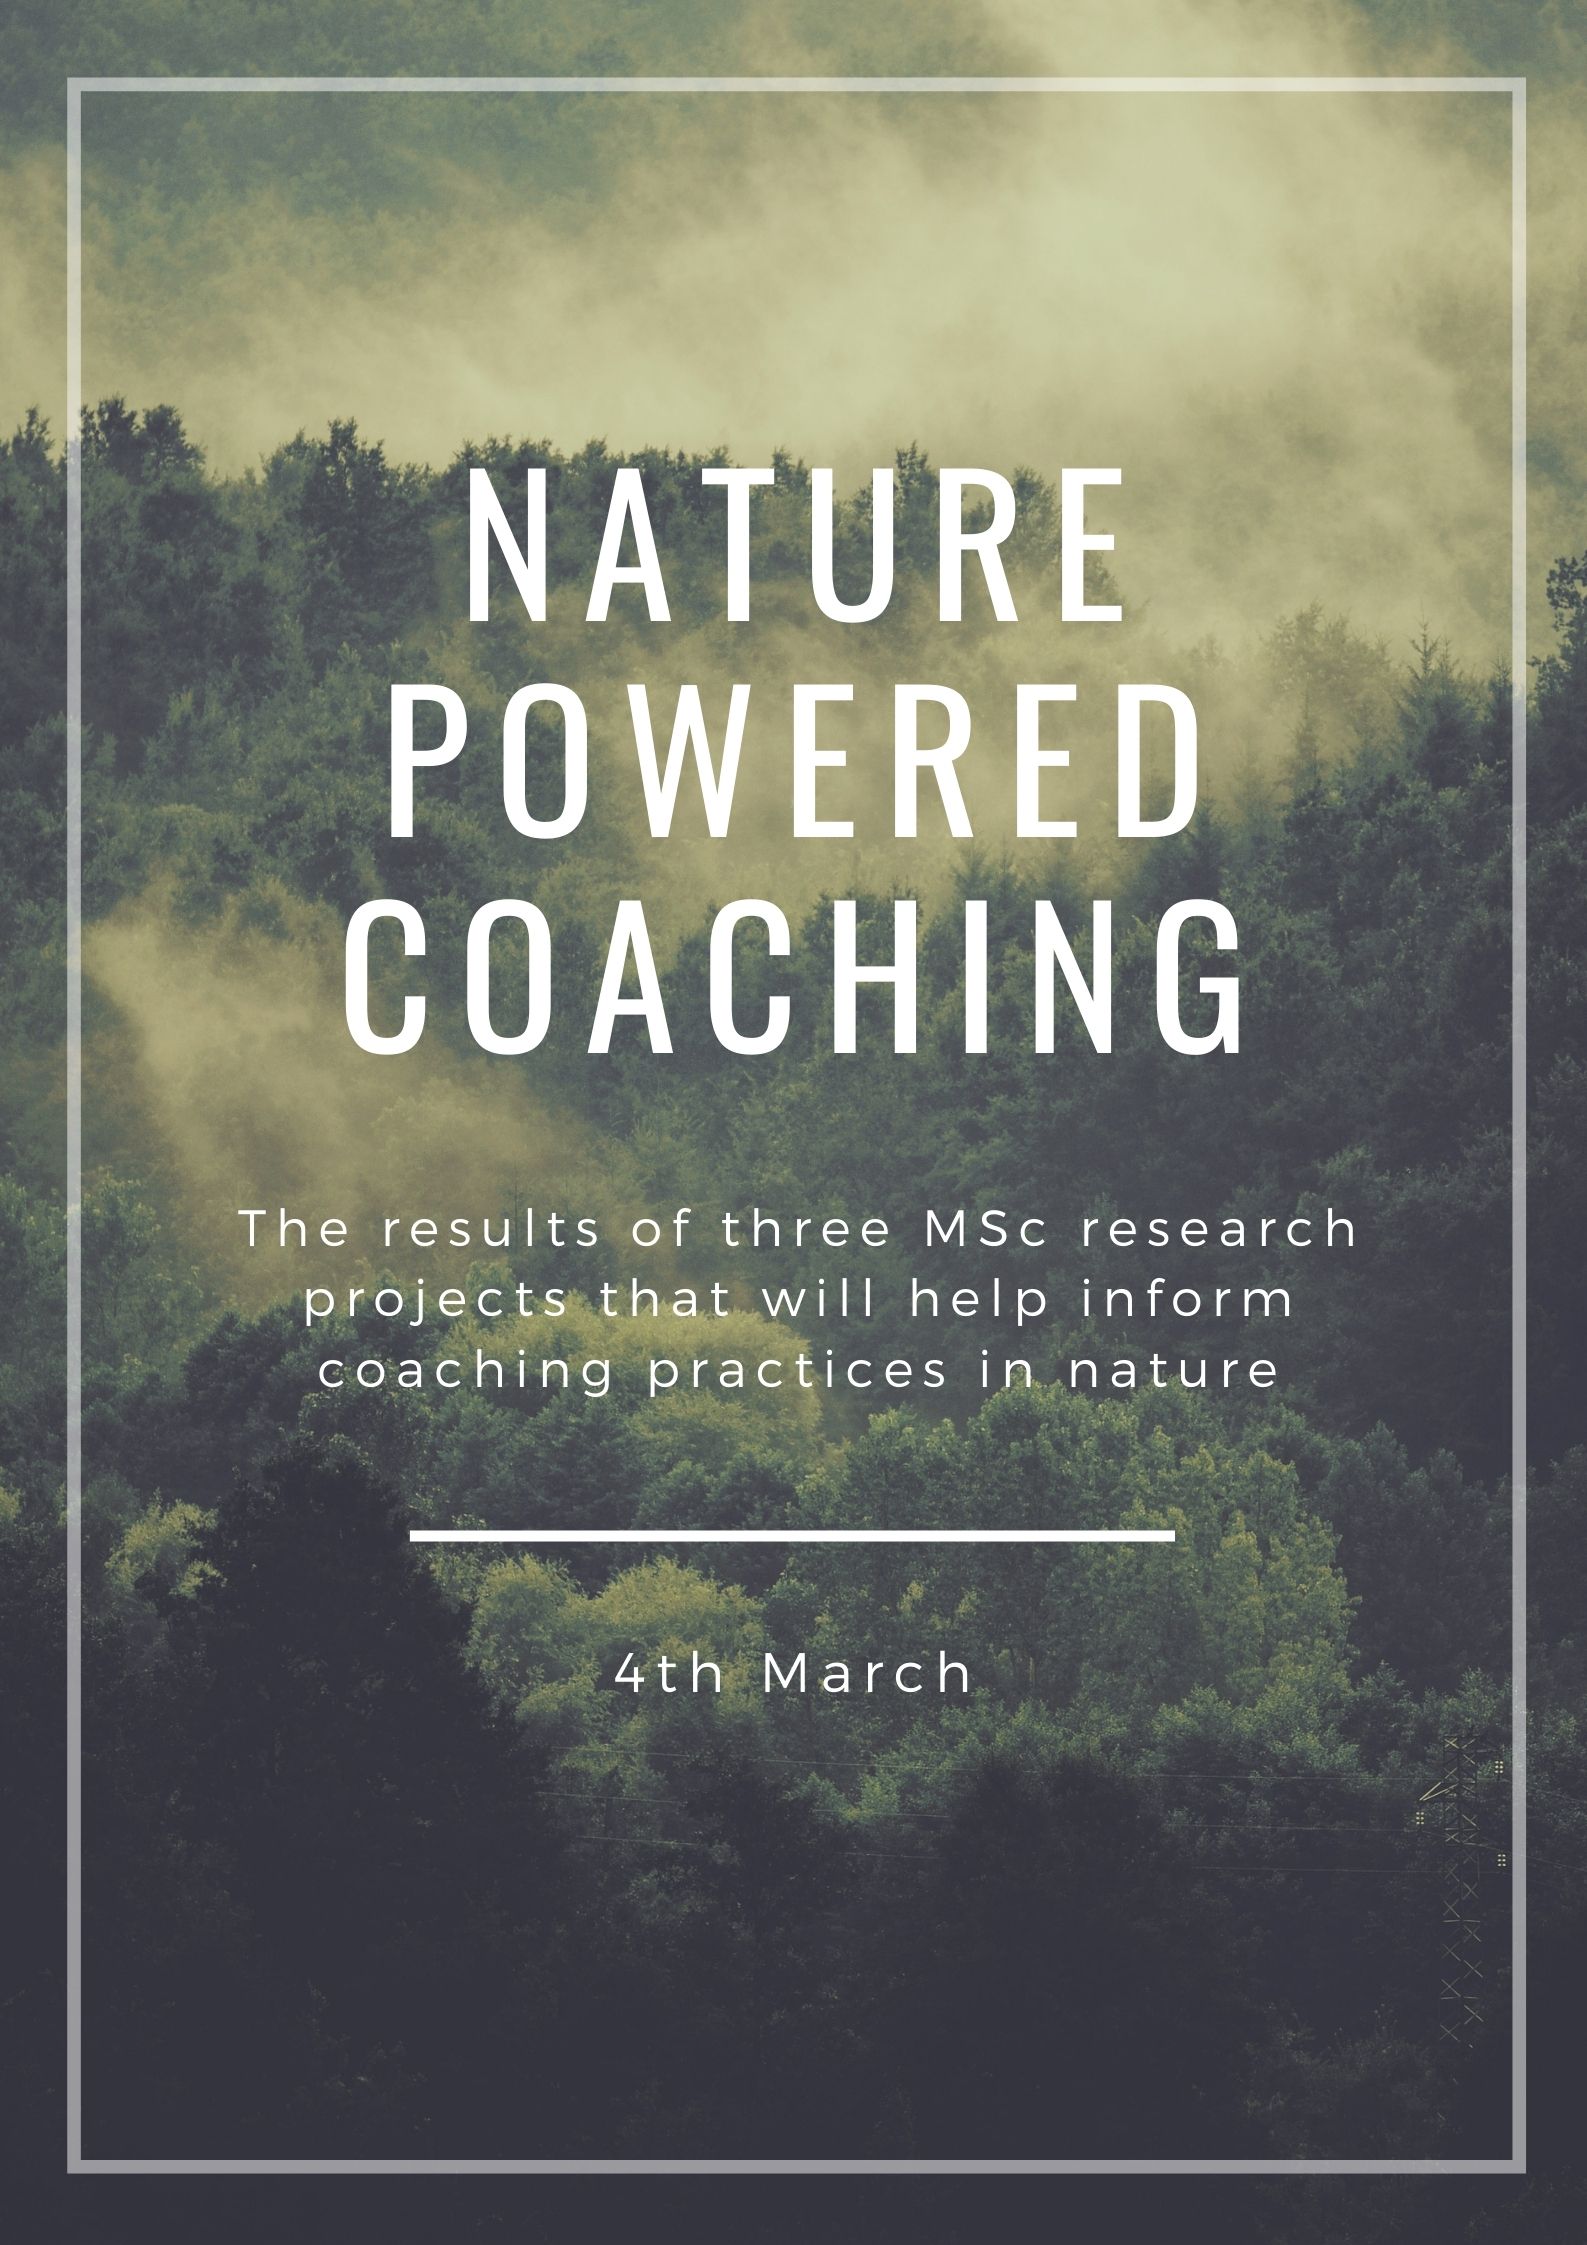 Research to inform nature-powered coaching